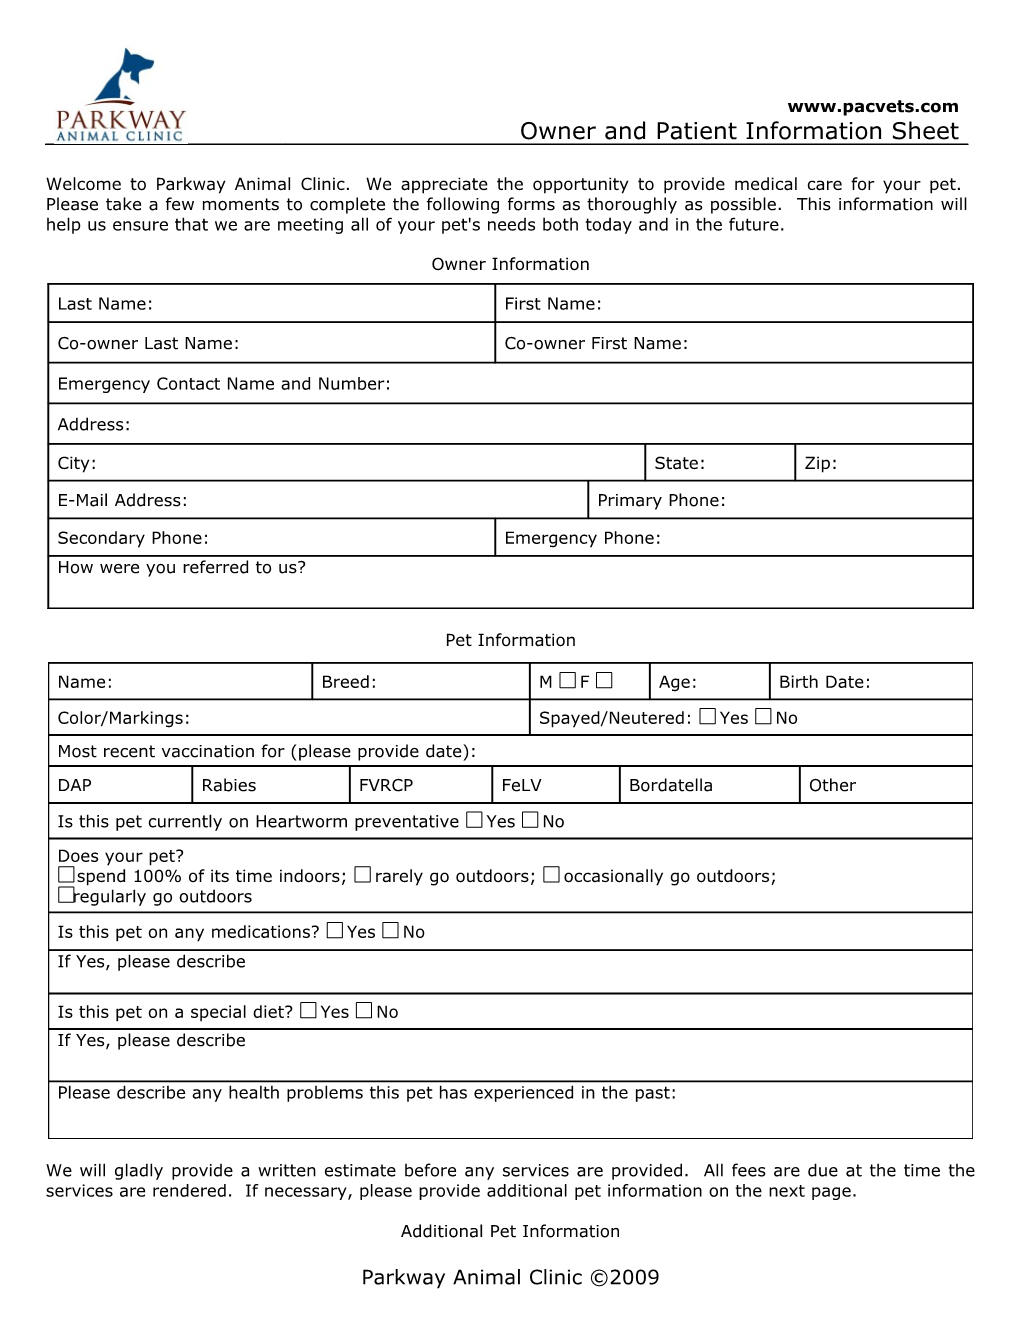 Owner and Patient Return Form